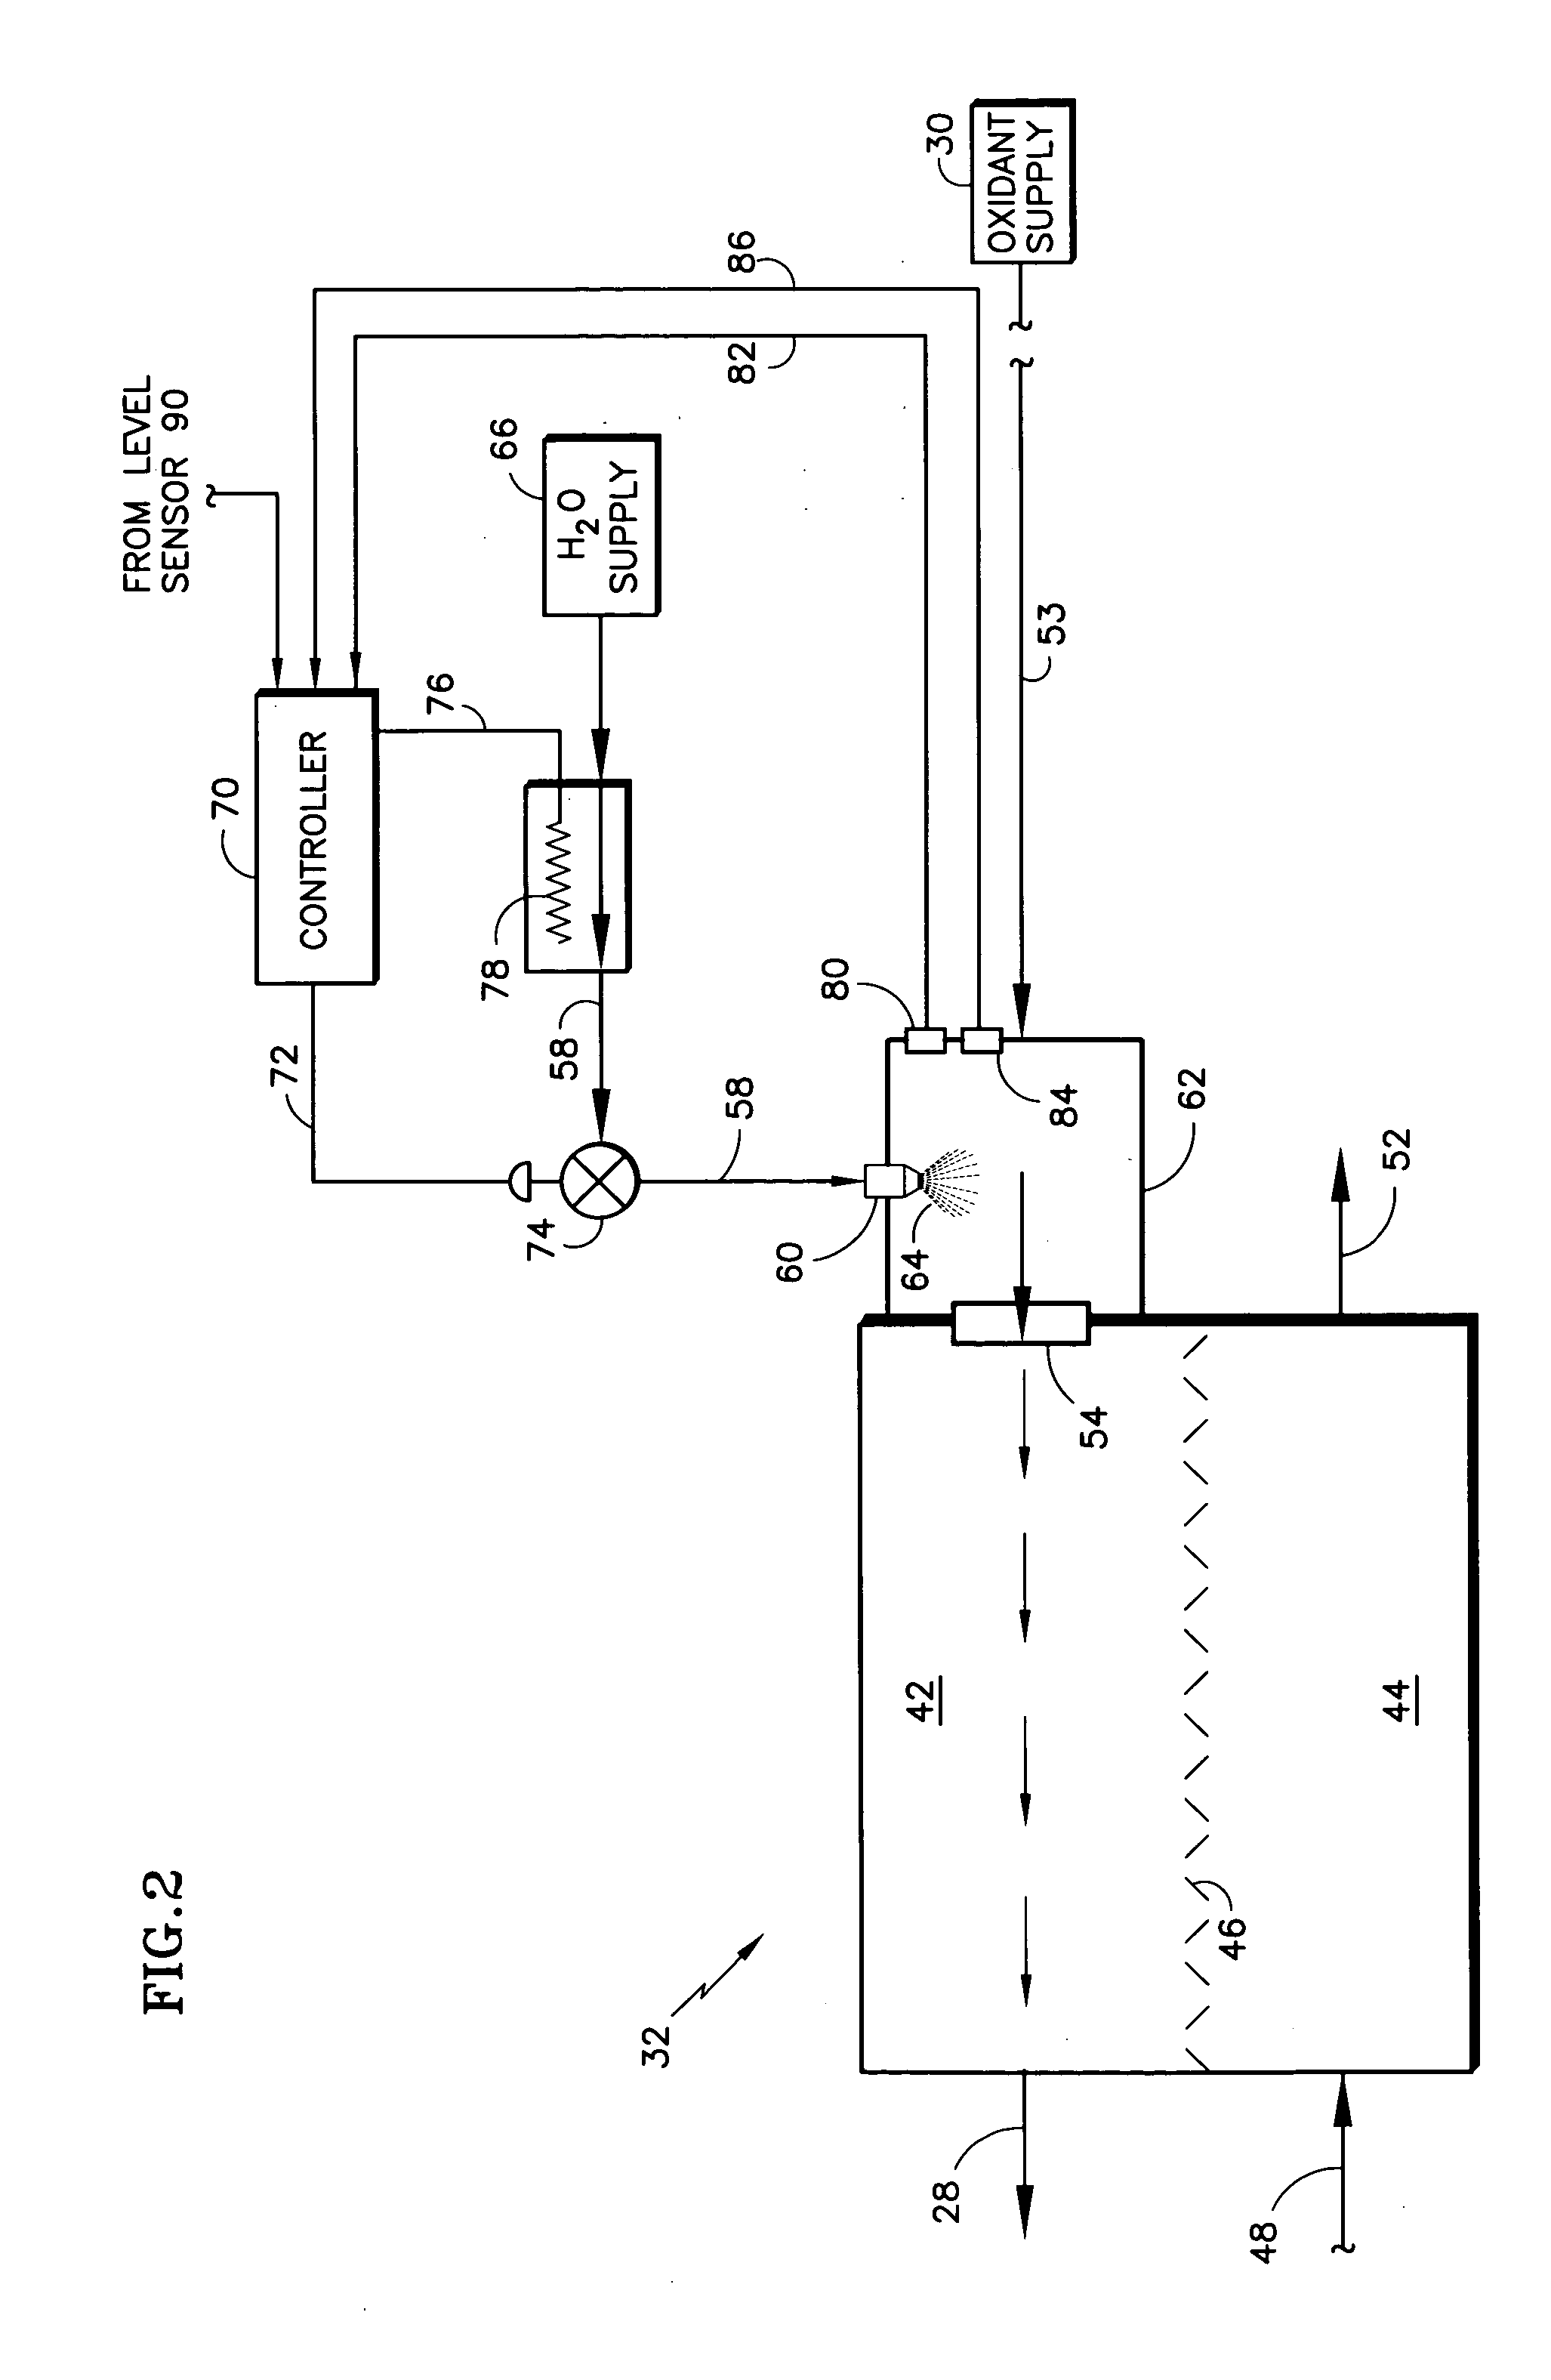 Method and apparatus for humidification control of an energy recovery device in a fuel cell power plant